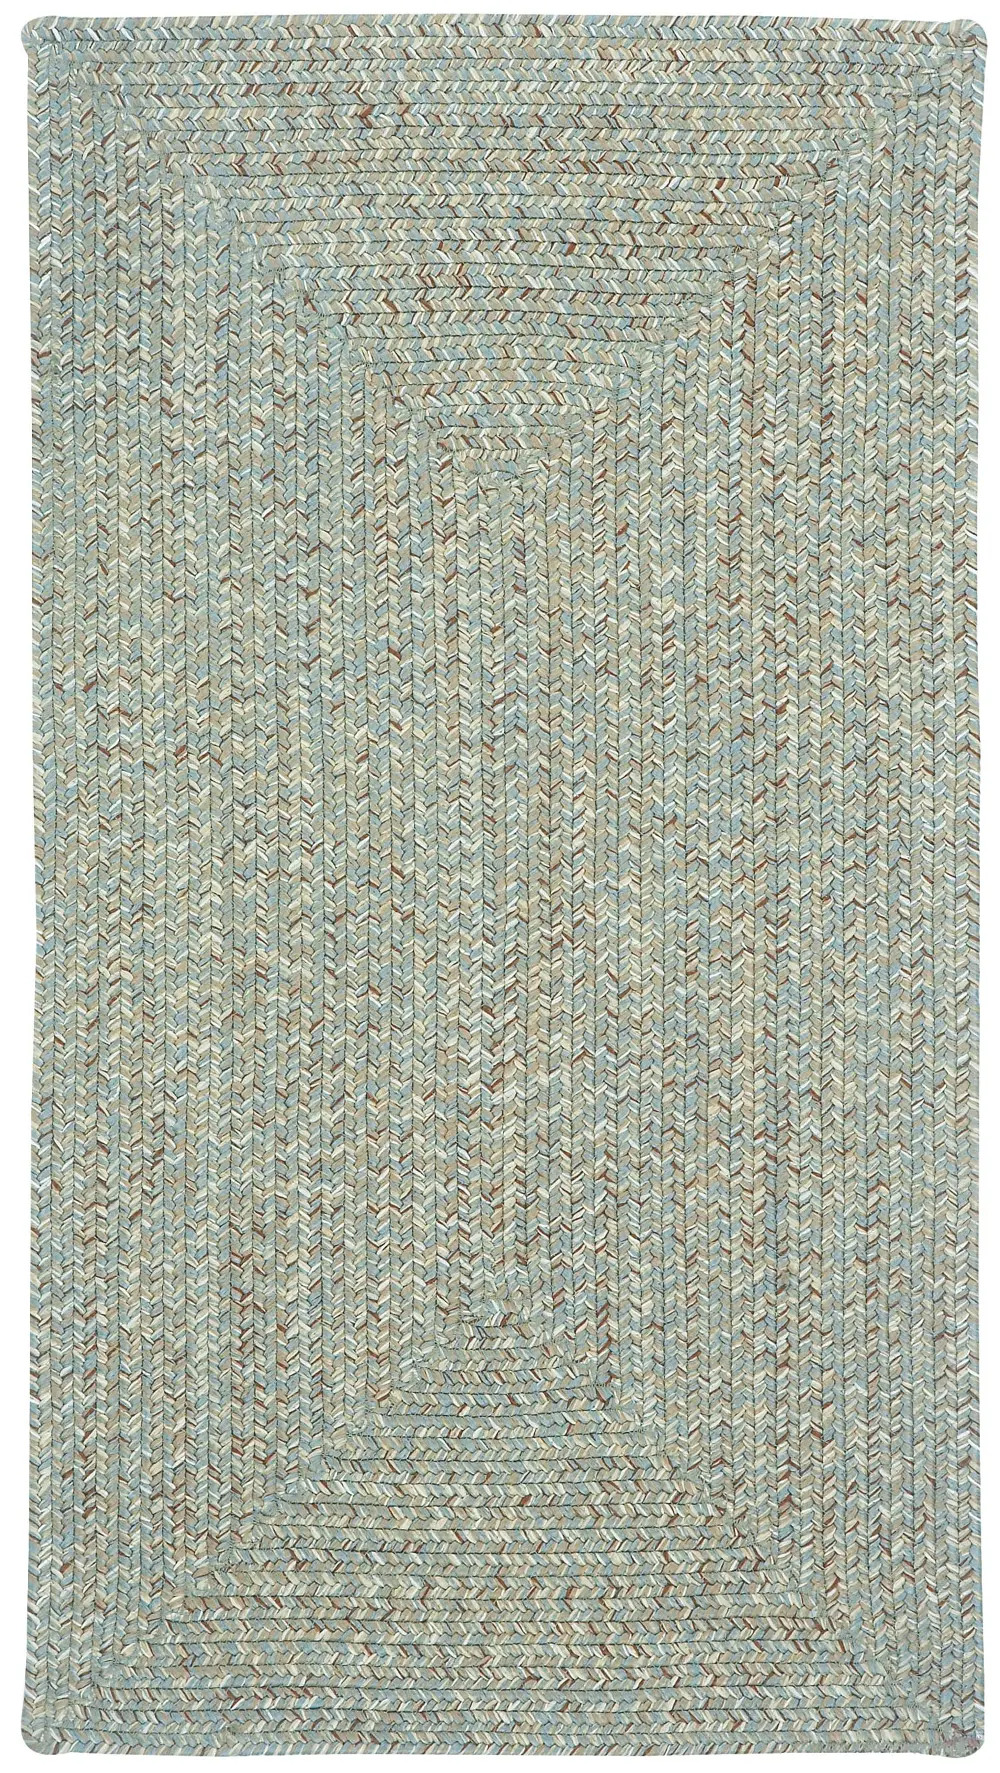 0110QS00200030450 XX-Small Spa Green Braided Indoor-Outdoor Rug - Sea Glass-1